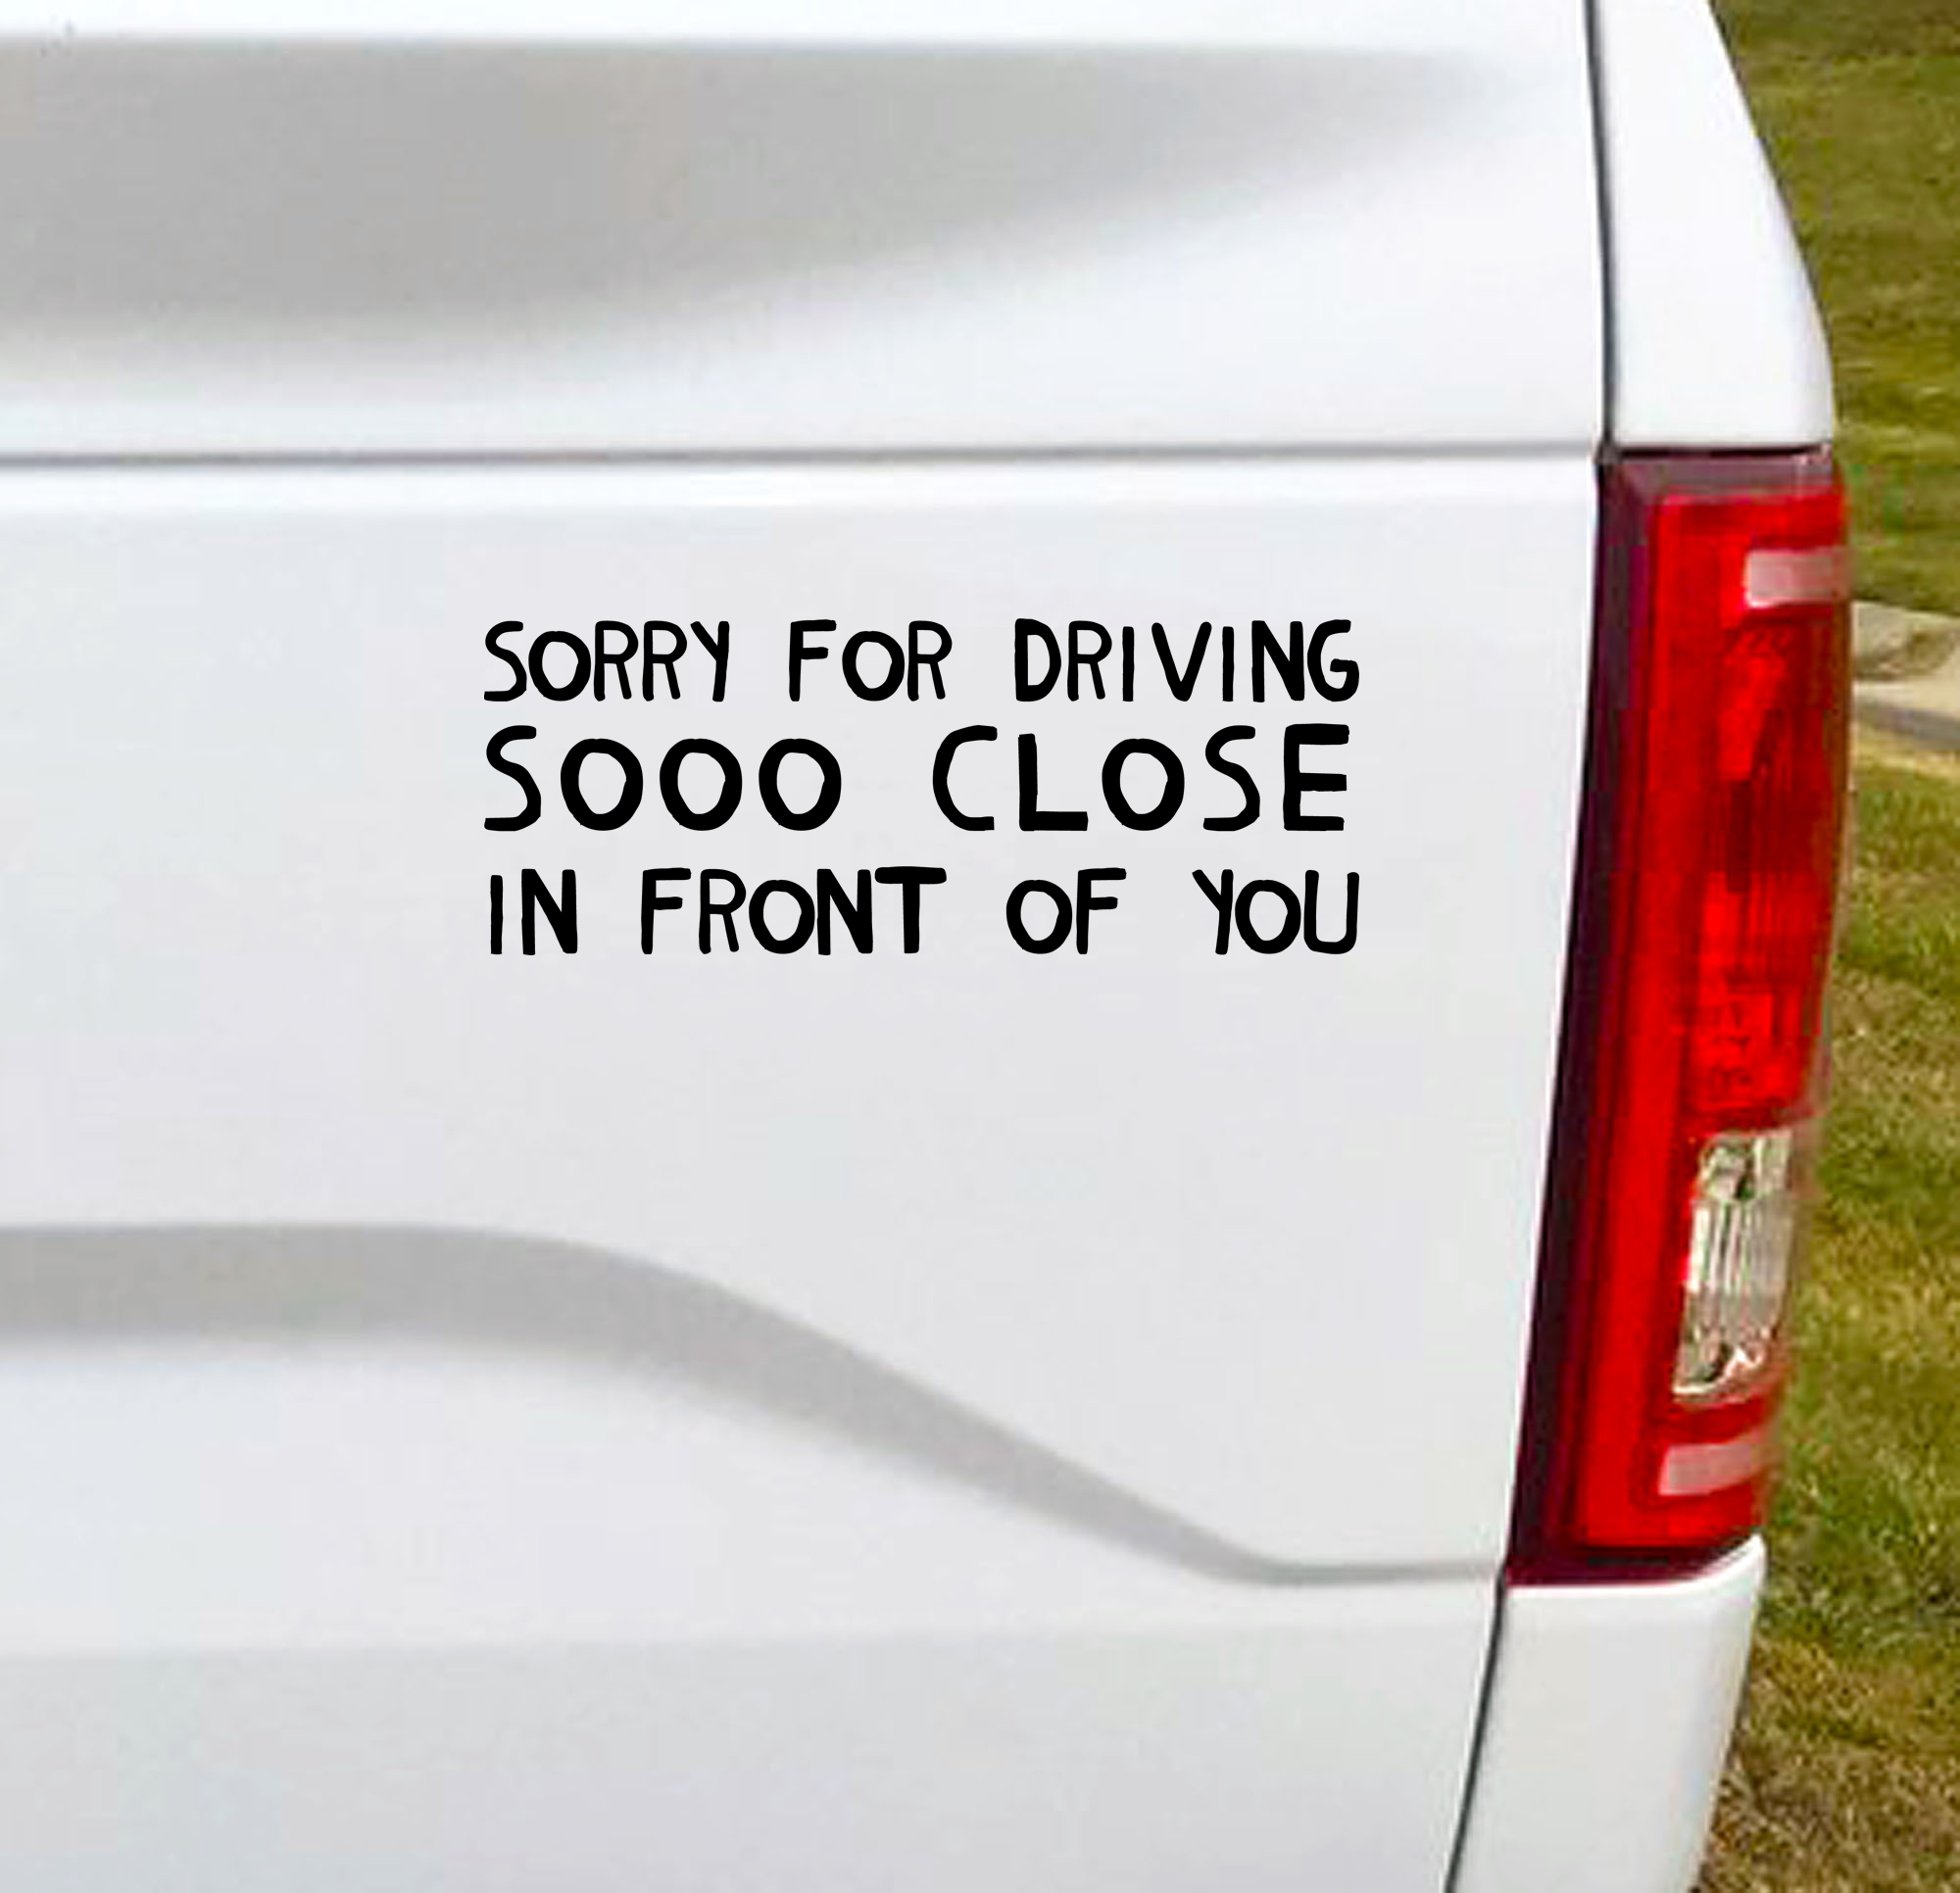 Sorry for driving so close in front of you Vinyl Car Decal Bumper Sticker. Let the drivers behind you know you don't like tailgaters with a little sarcastic humor. 6.5"W x 2.5" Car Decal, Car Sticker, Car Vinyl, Bumper Sticker, Vinyl Stickers, Vinyl Sticker.